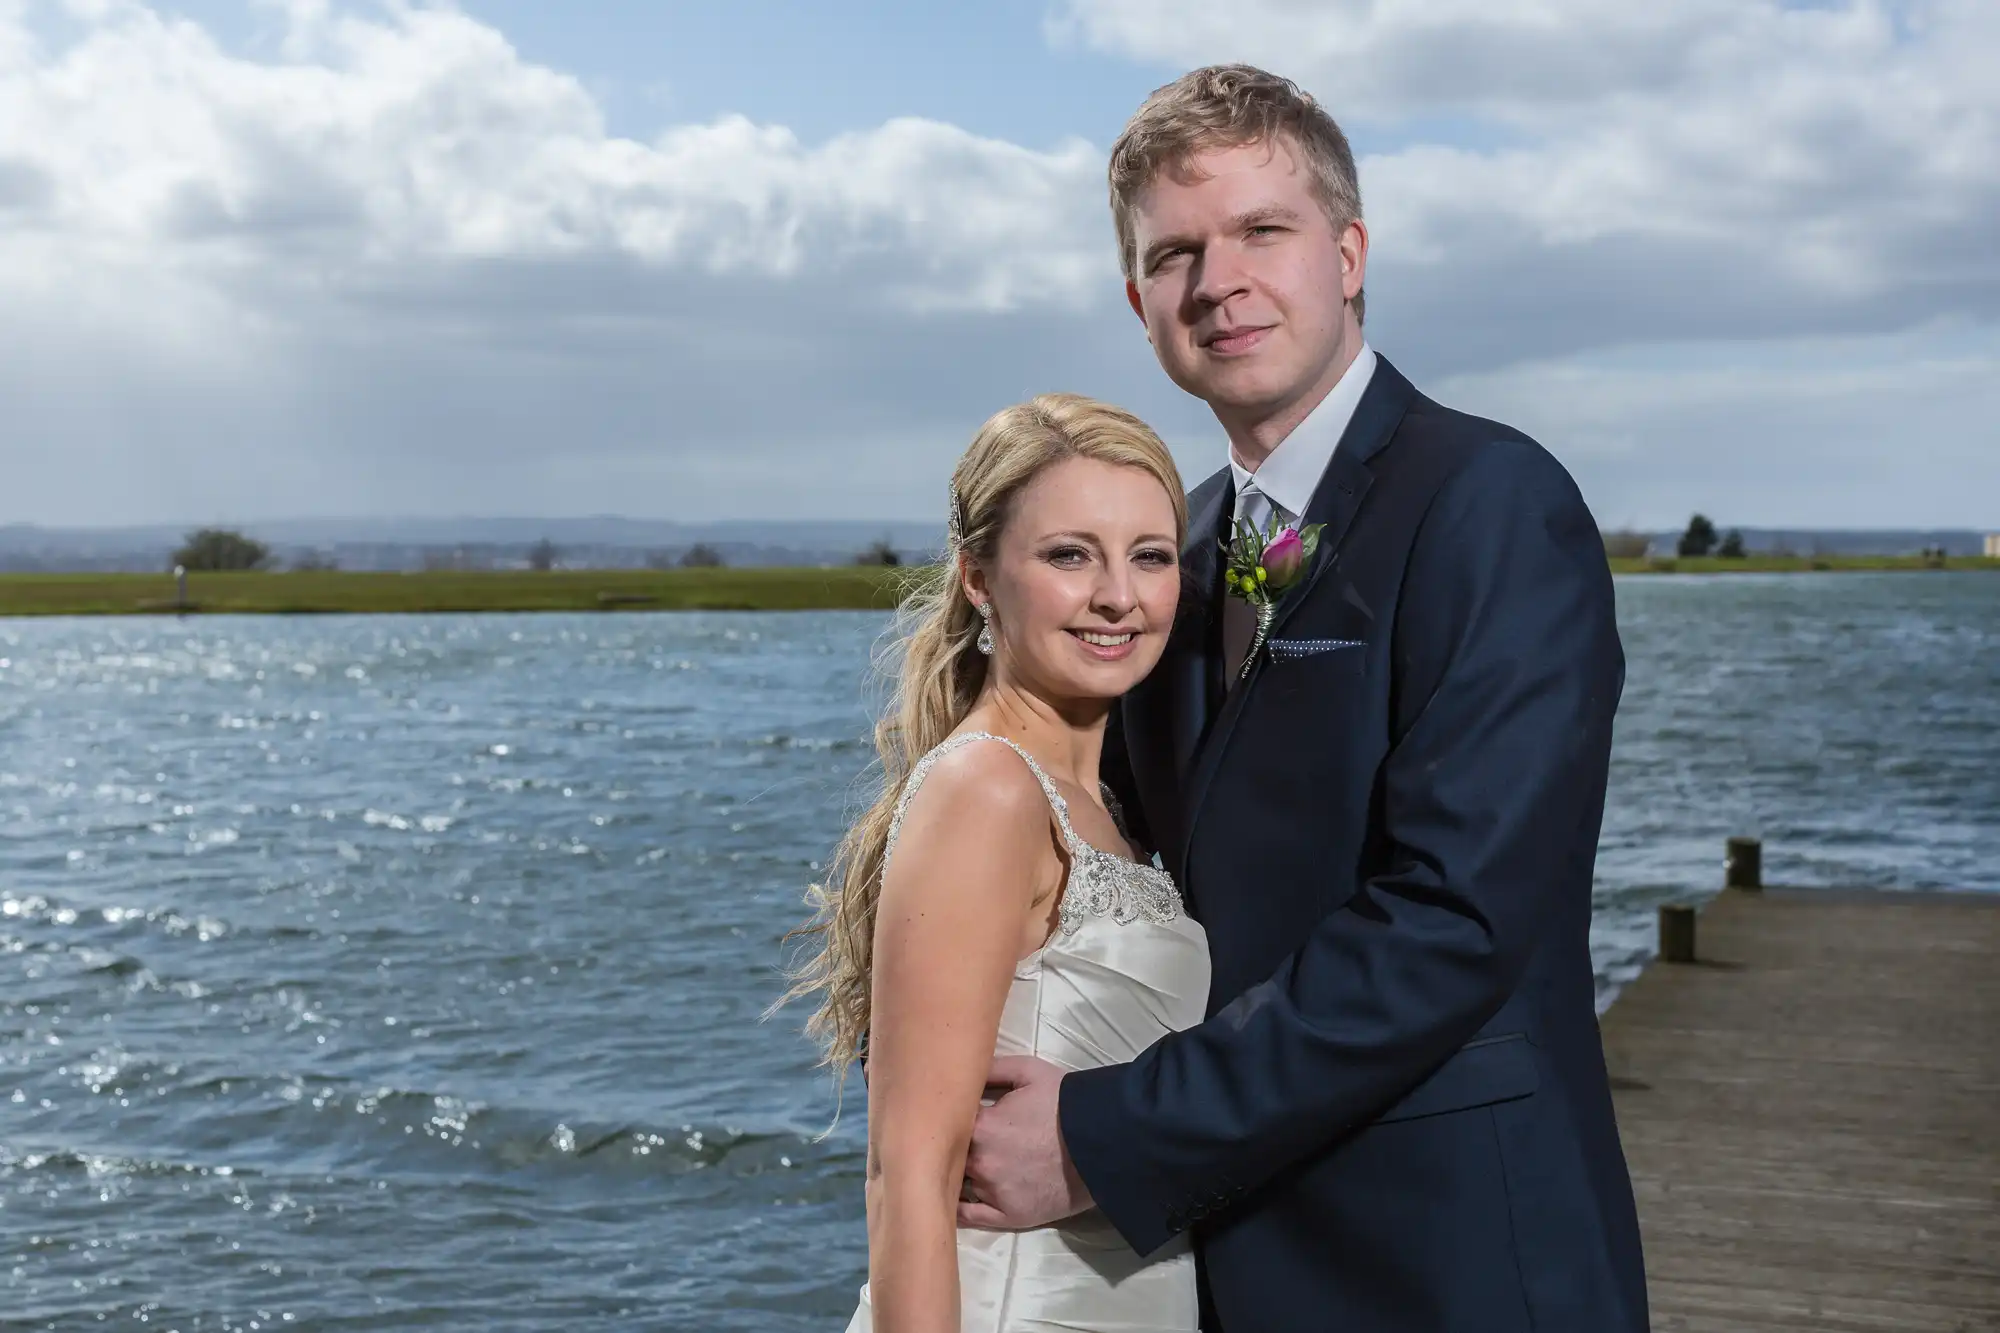 A bride and groom embracing on a wooden pier, with a serene lake and cloudy sky in the background.